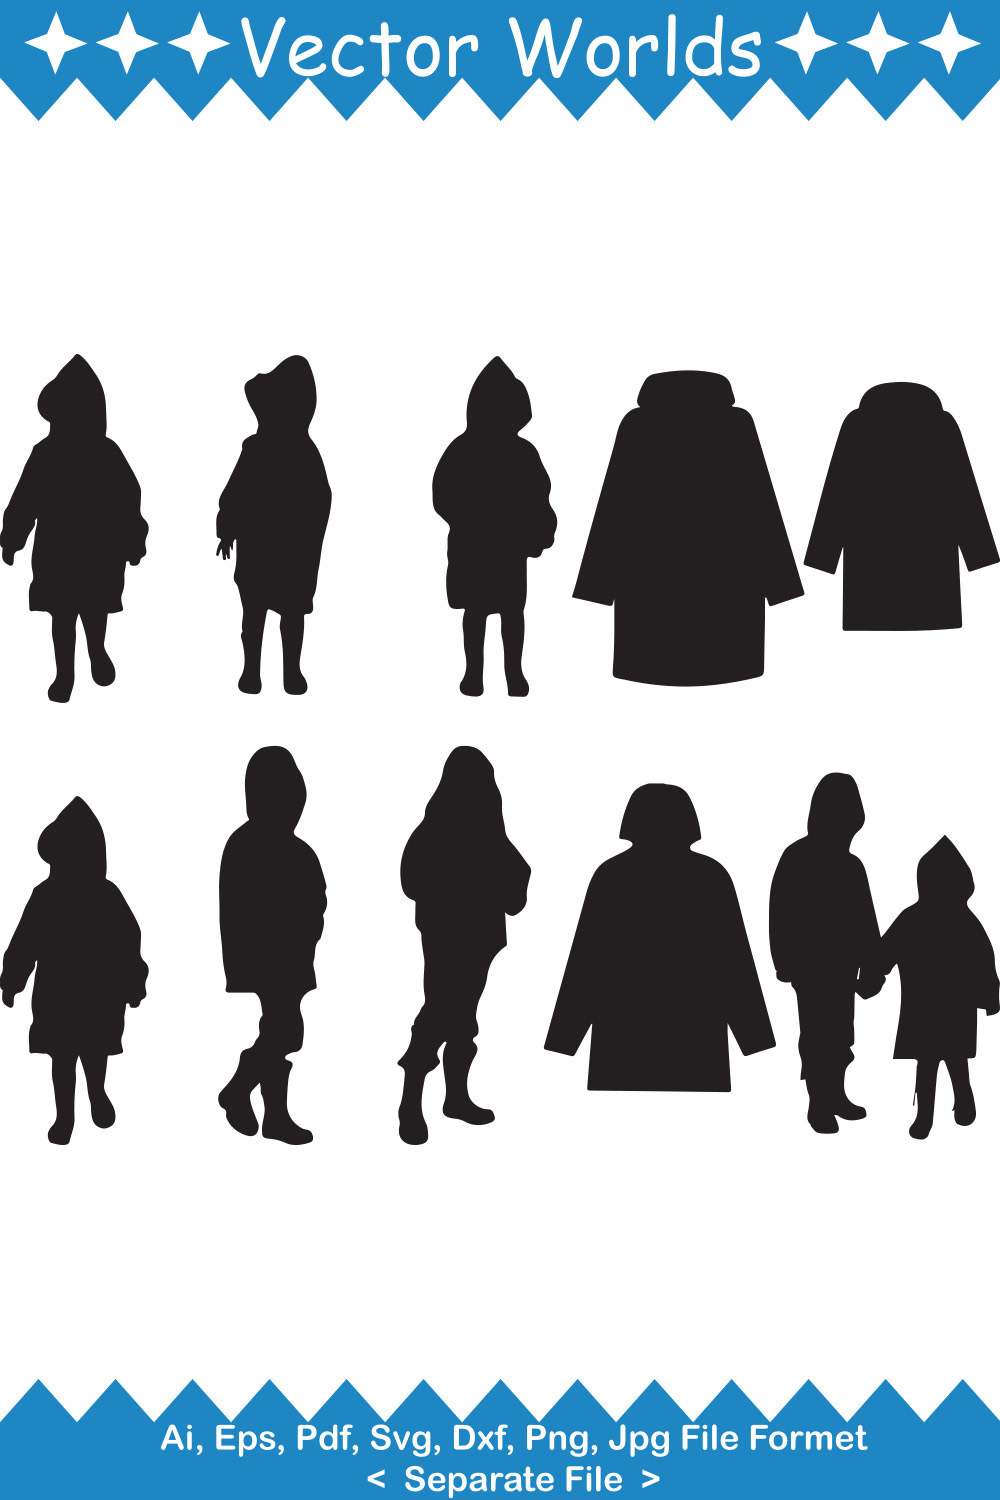 A selection of vector wonderful images of silhouettes of raincoats.